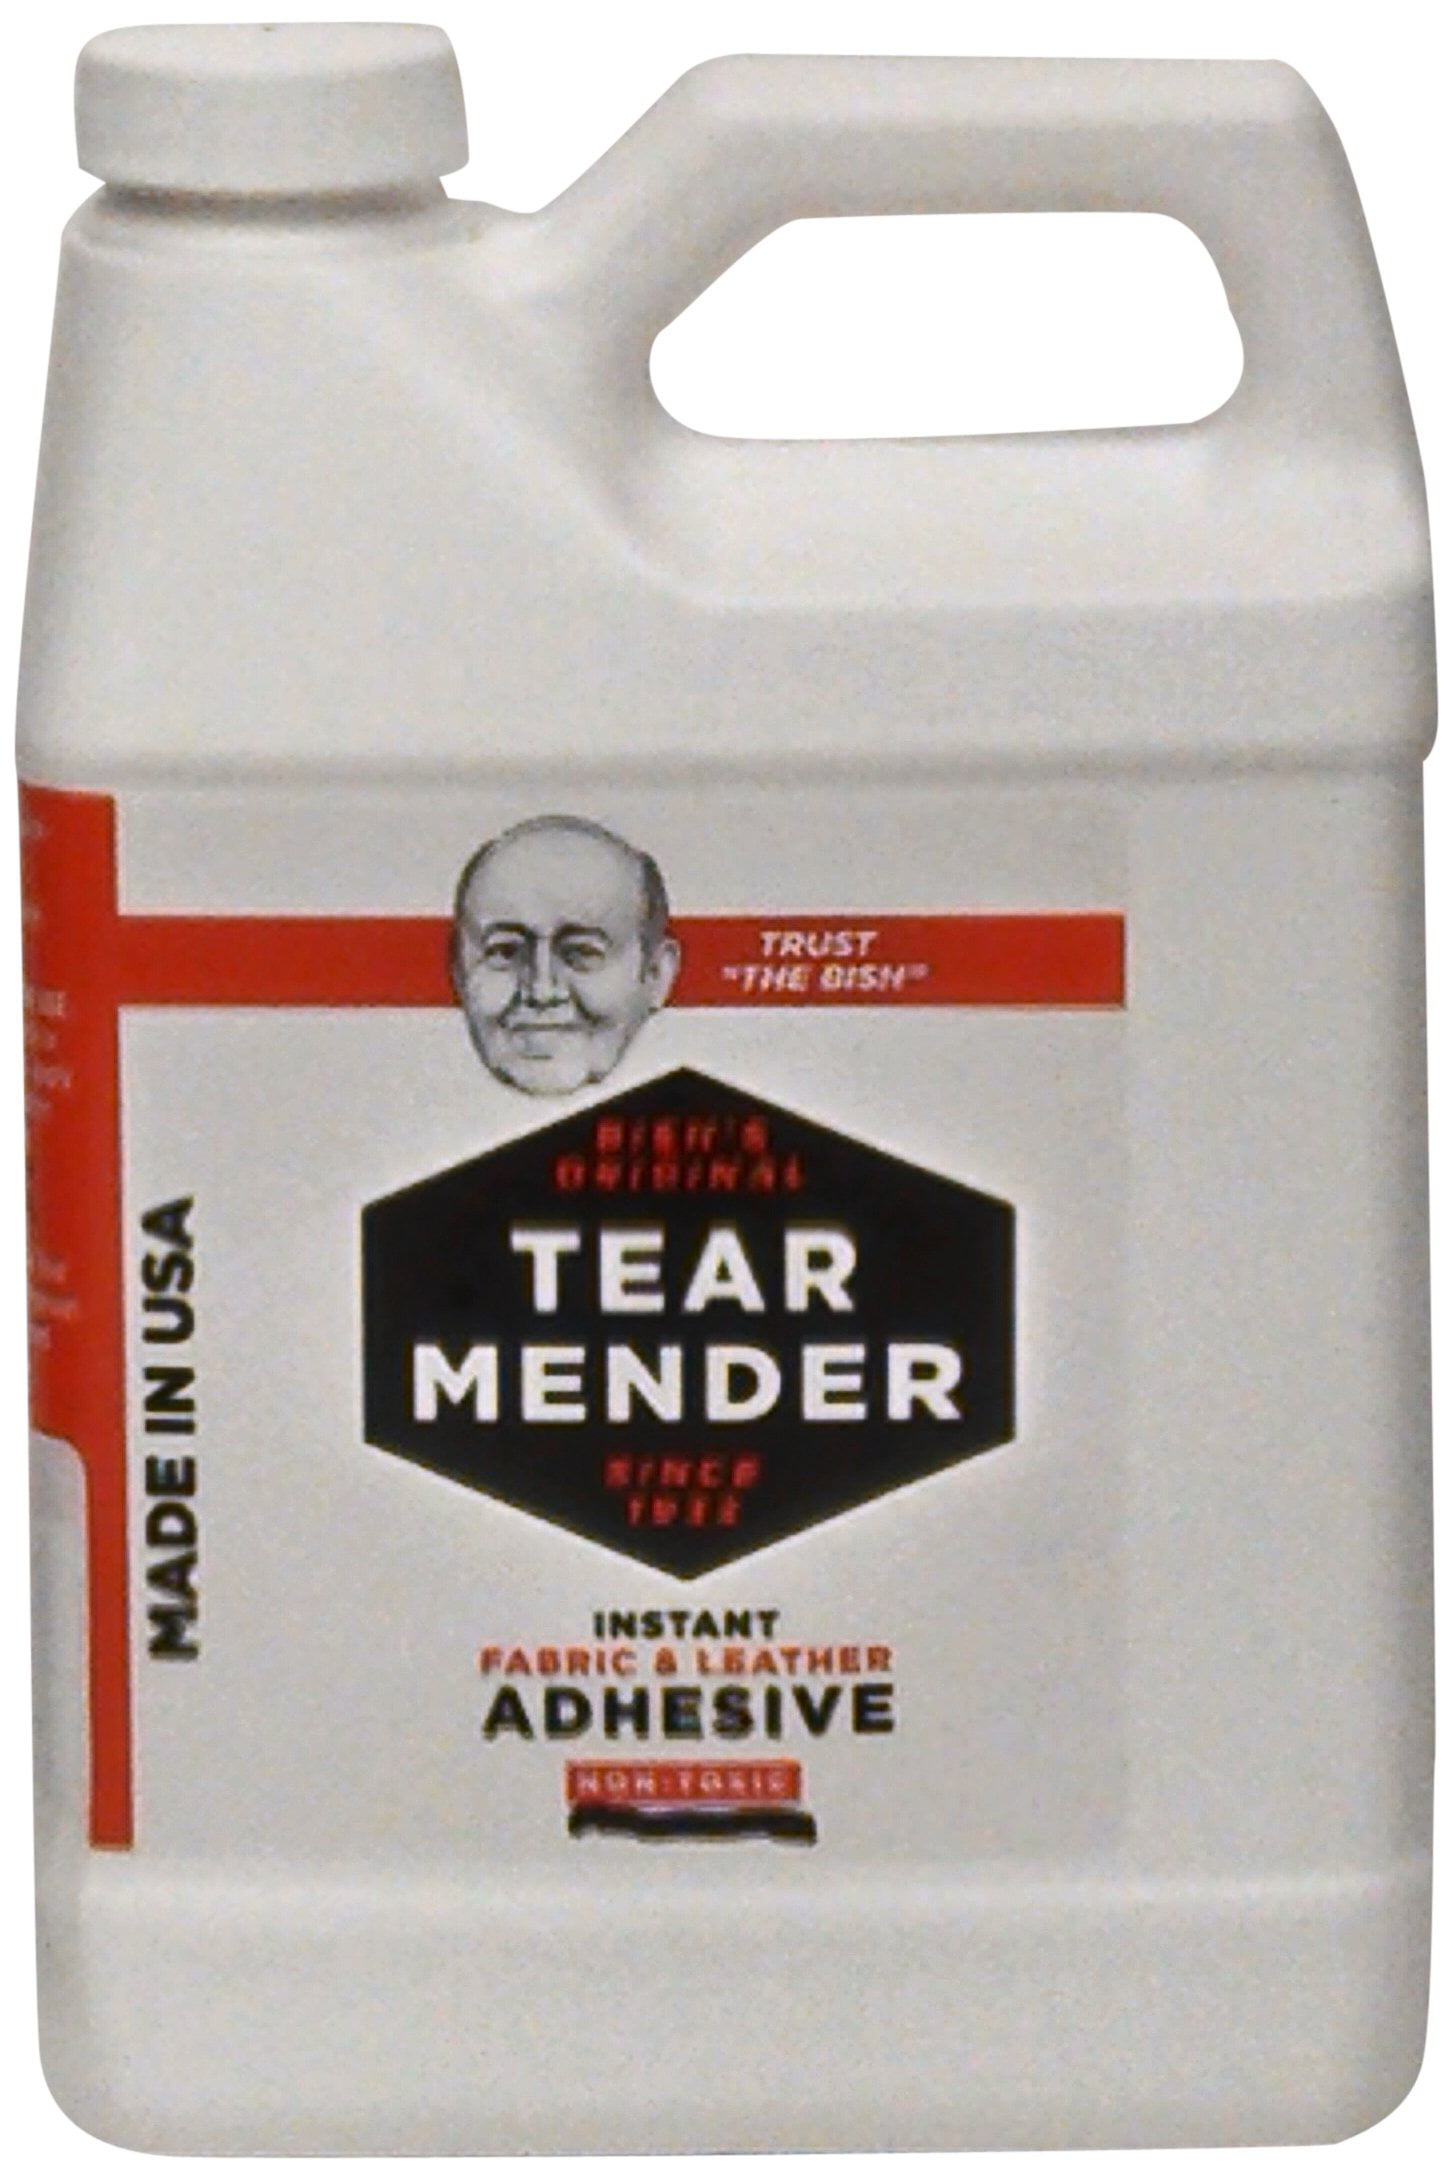 Pair of Tear Mender Instant Fabric & Leather Adhesives 2oz